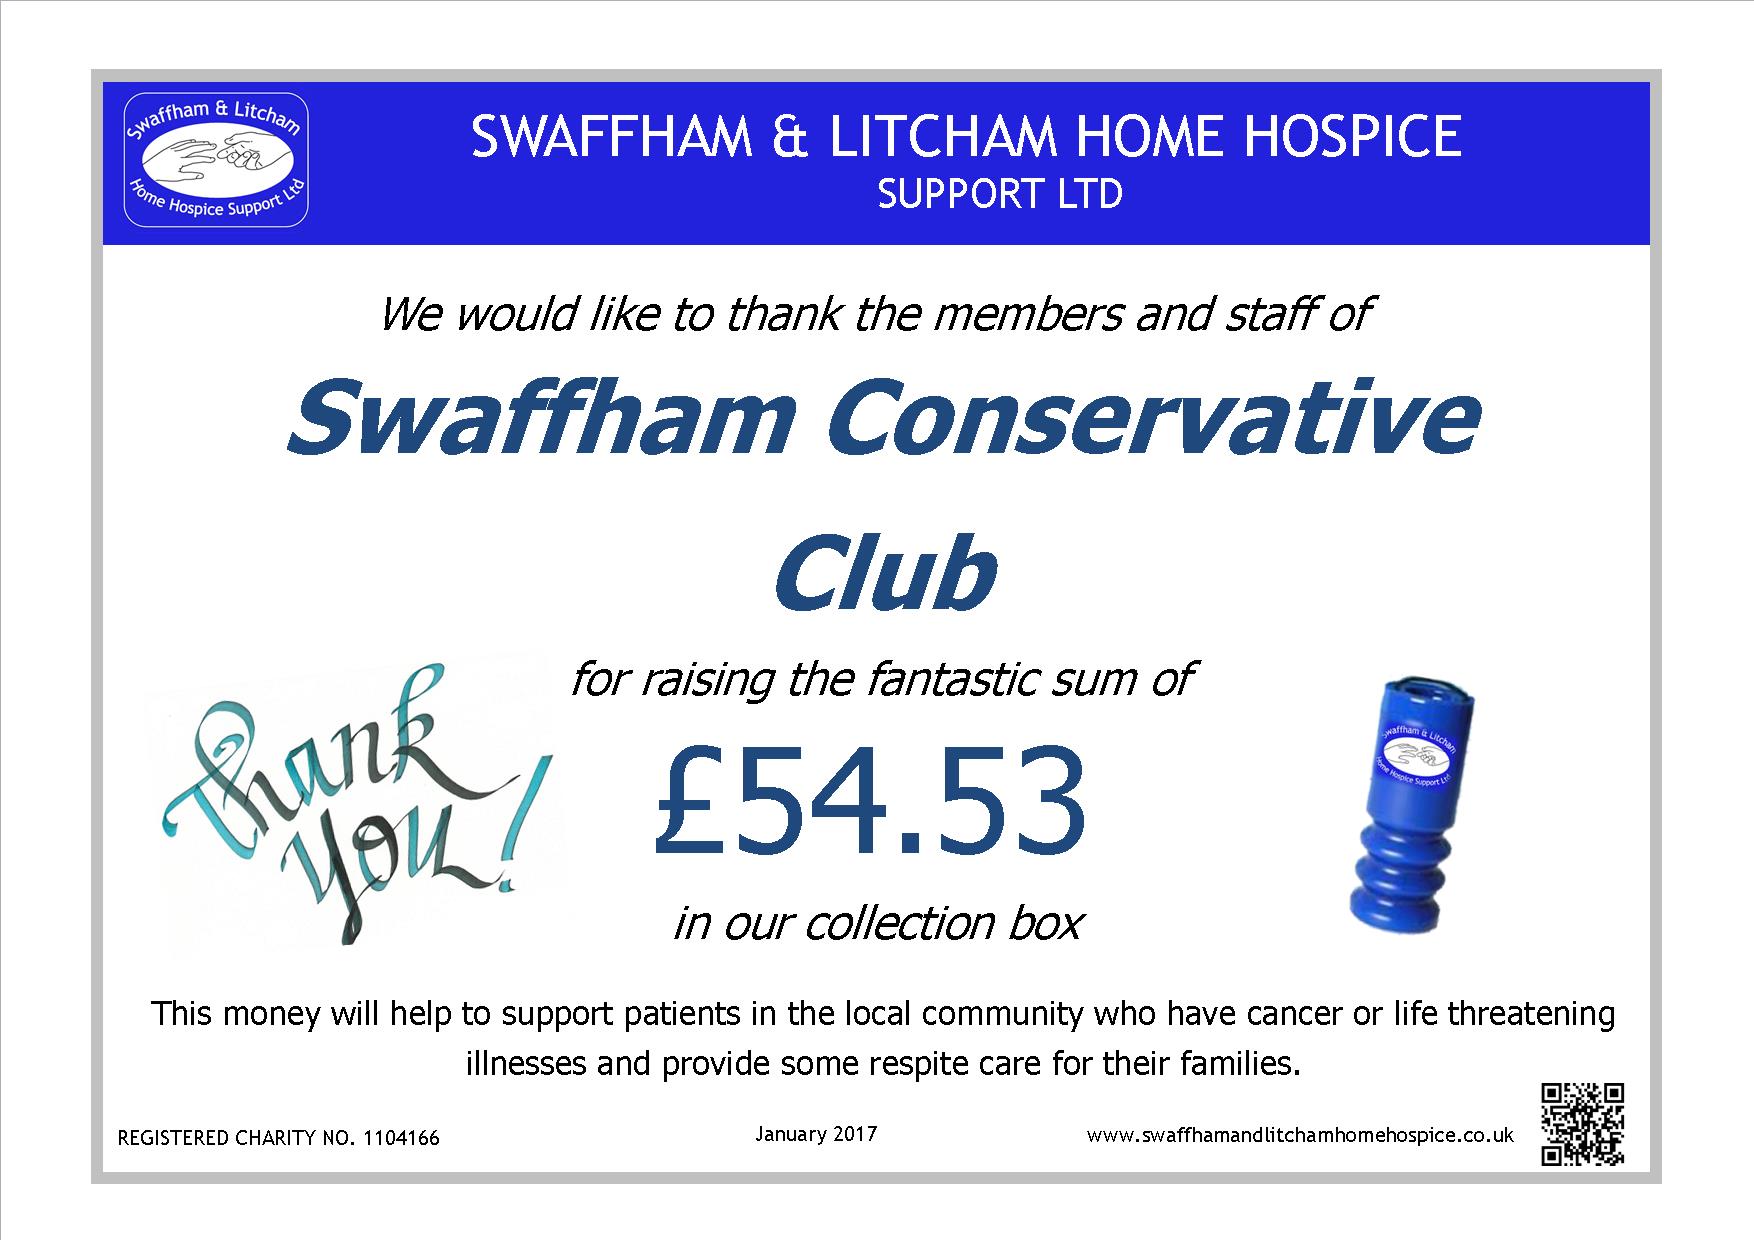 Money raised by Members and Staff at Swaffham Conservative Club, January 2017